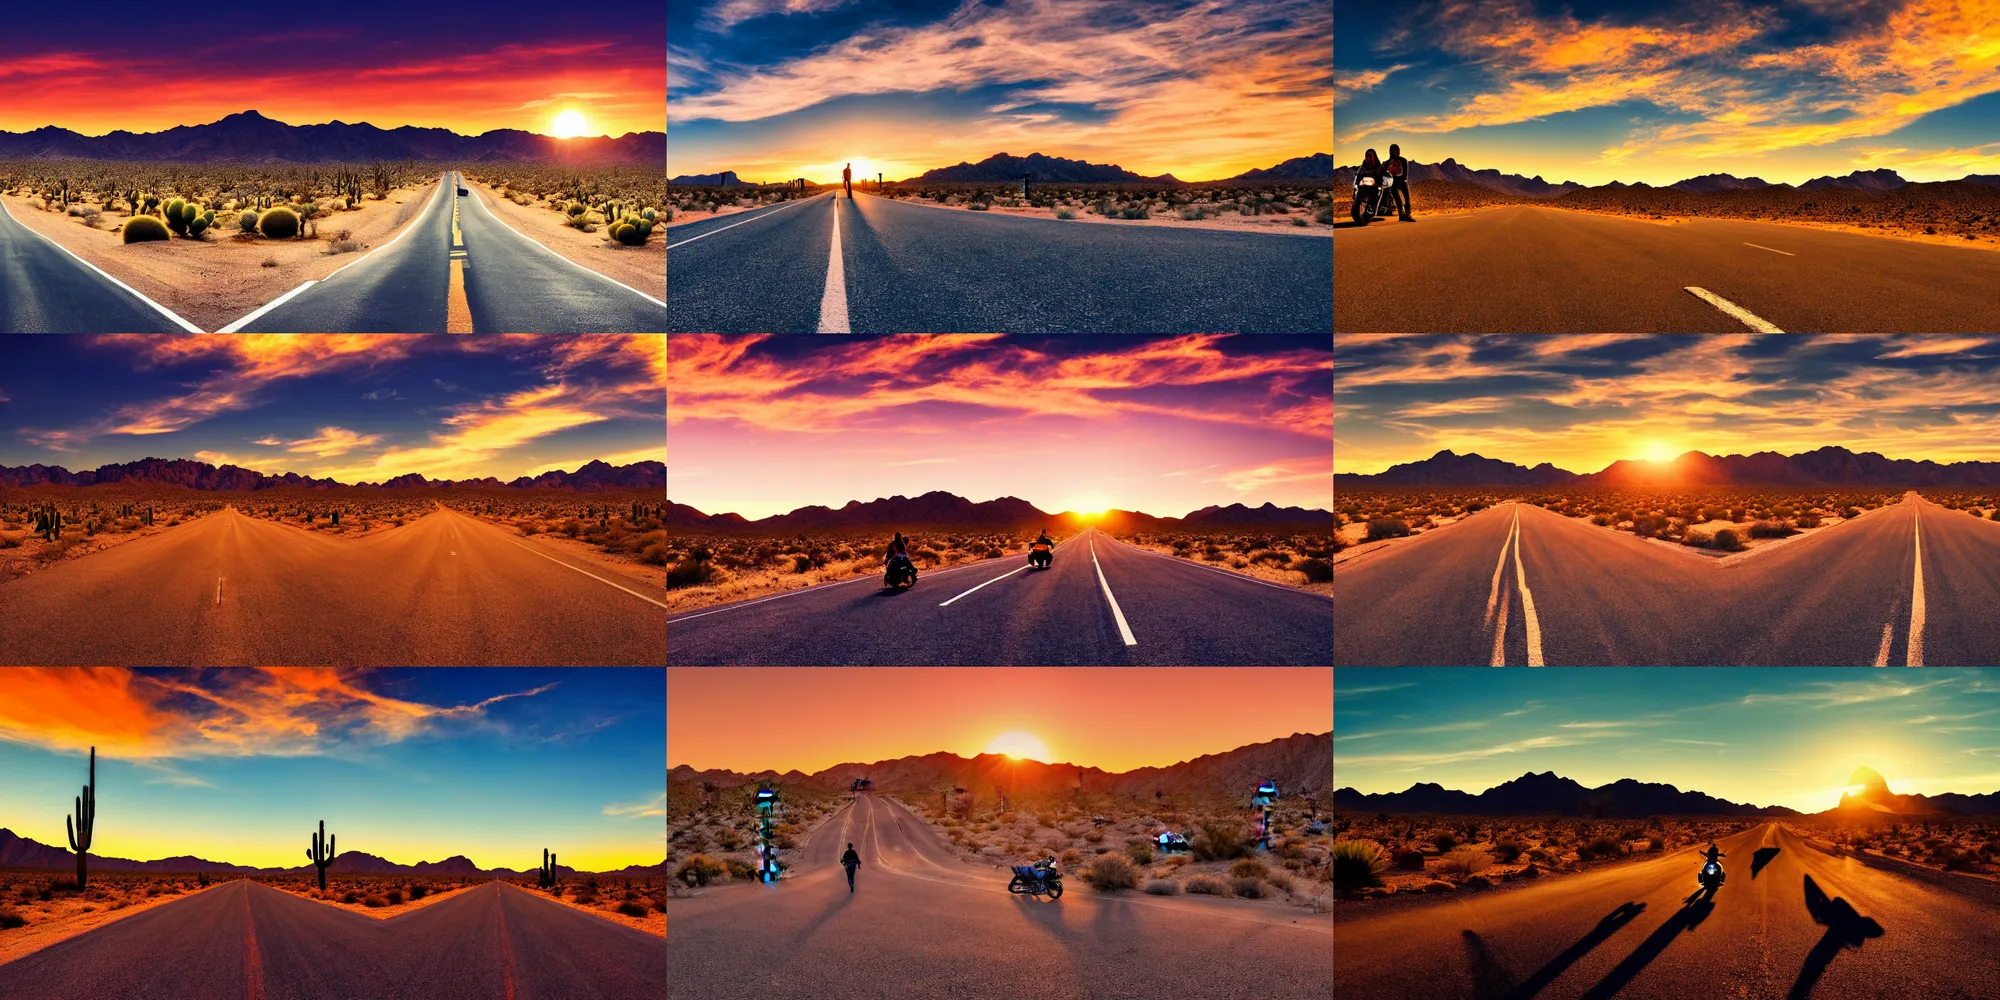 Prompt: hd wallpaper, road california desert, sunset, blue sky, cactus, high detailed, one motorbike in center of frame, romantic couple, go out here, beautiful concept photo, wallpaper